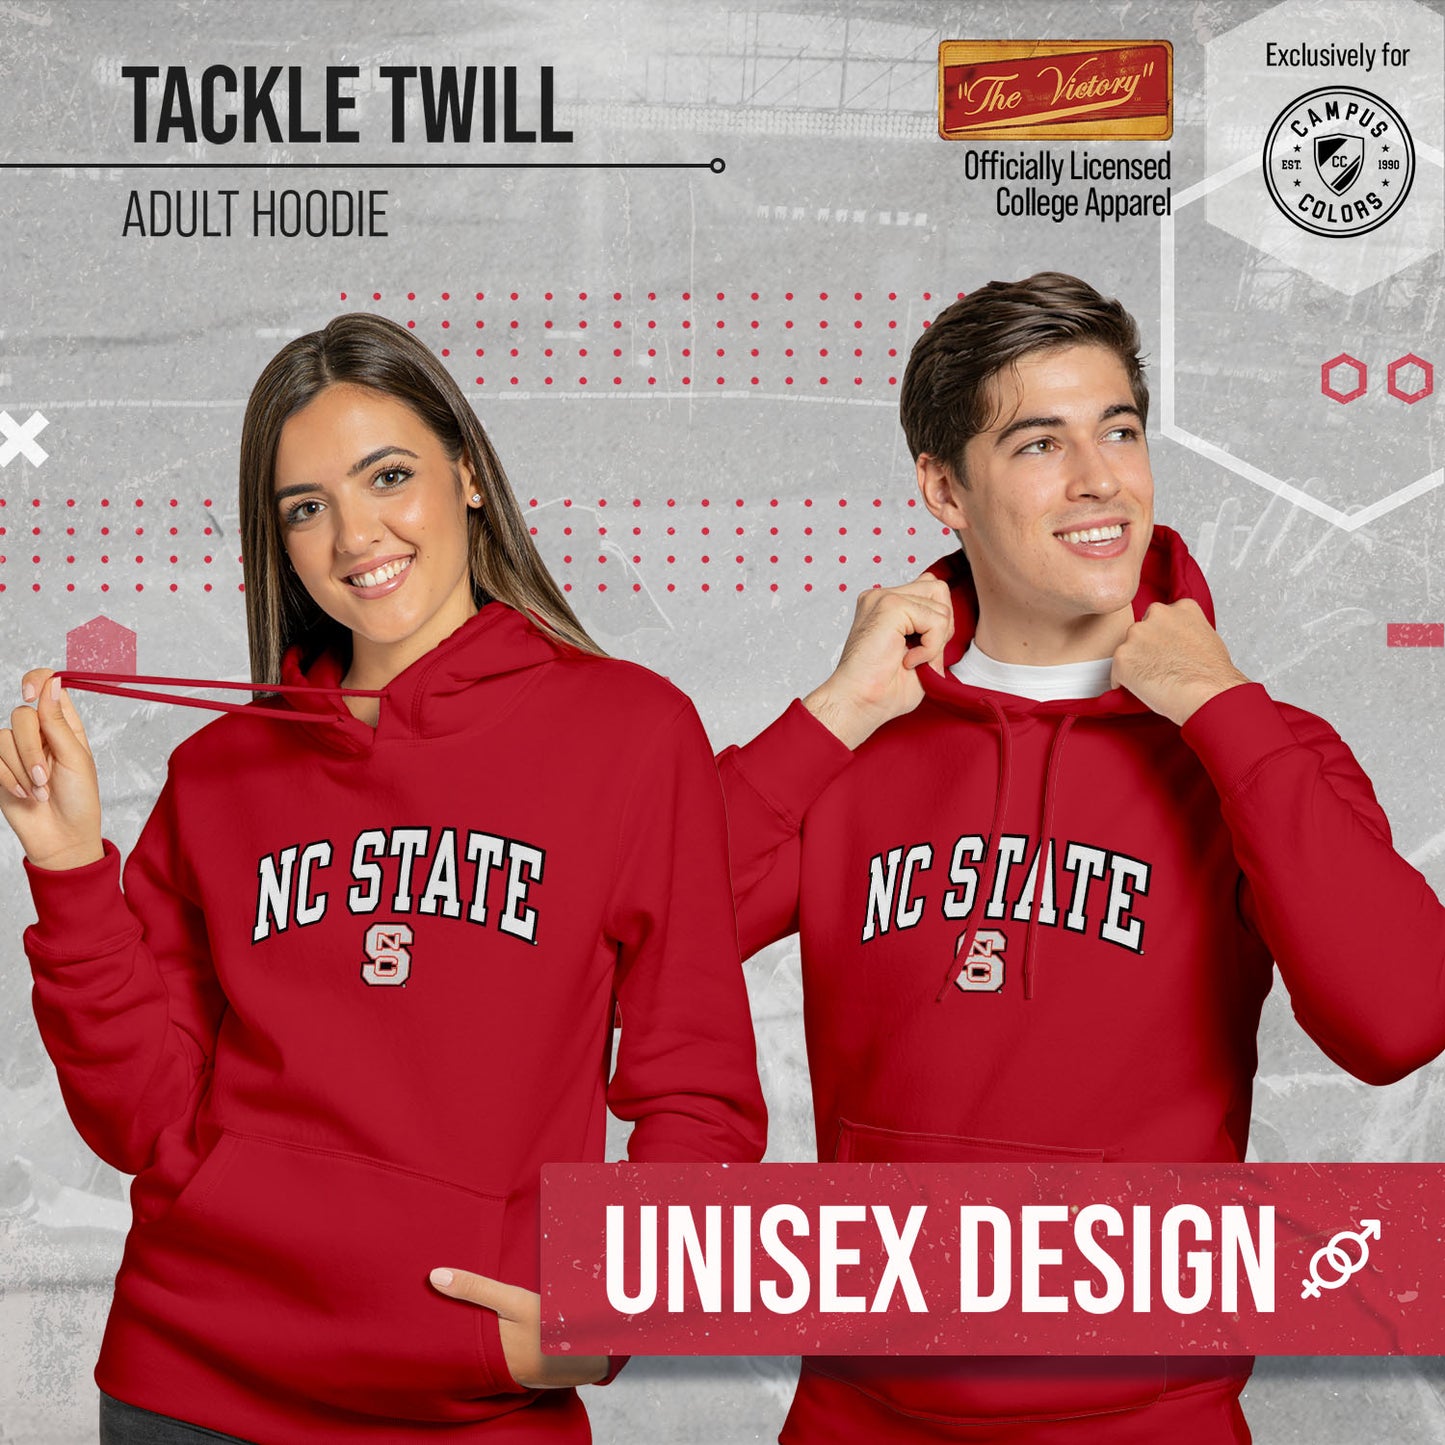 NC State Wolfpack NCAA Adult Tackle Twill Hooded Sweatshirt - Red